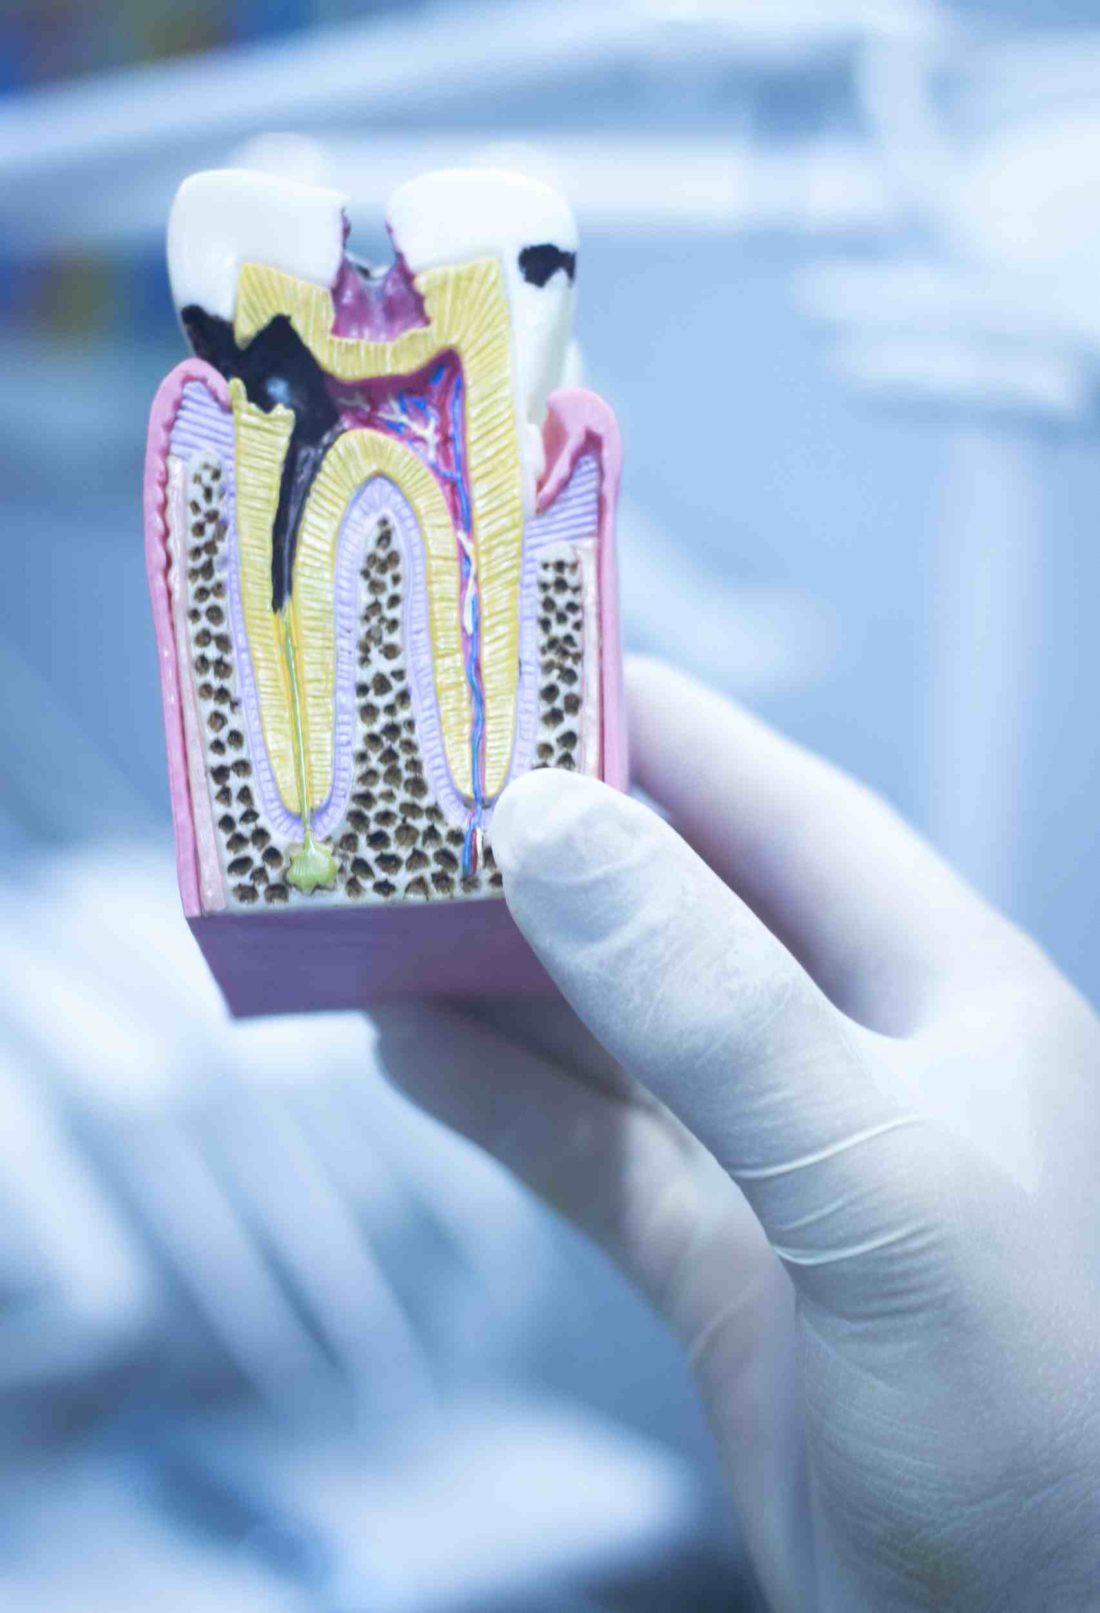 Preventing Tooth Decay: What Are the Top 5 Causes?